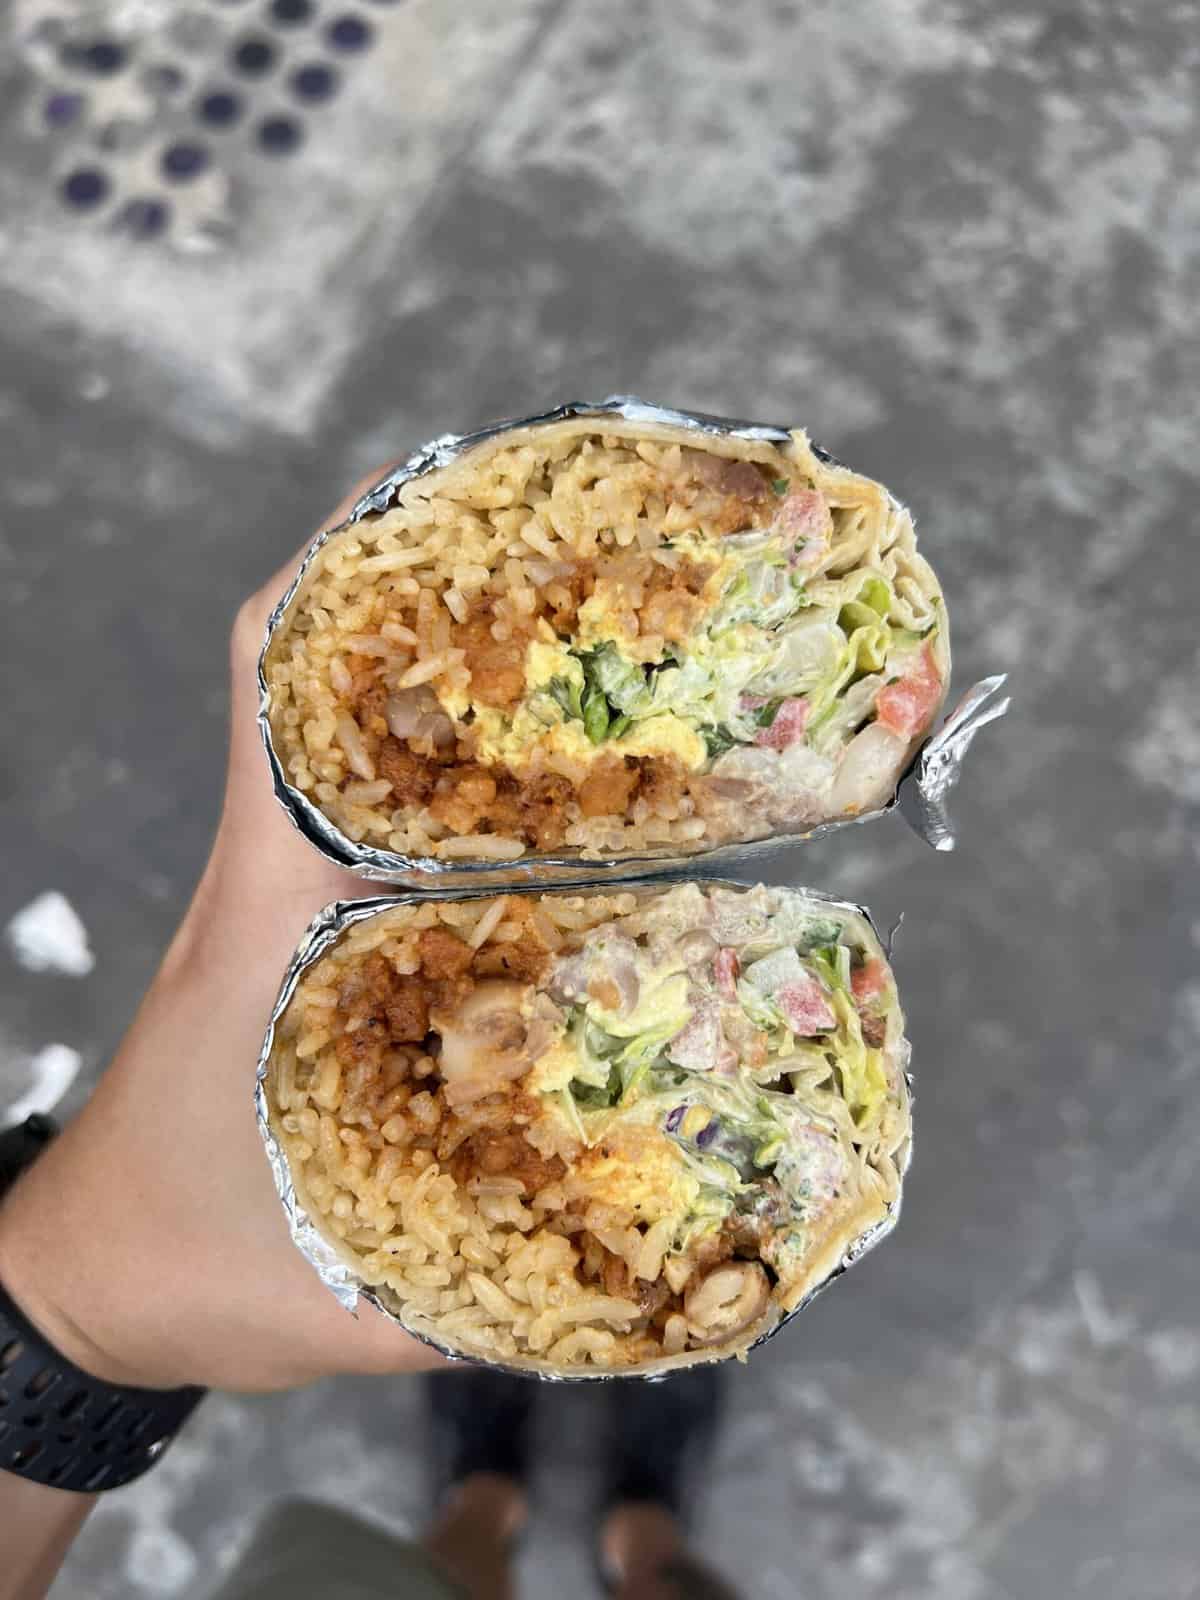 Burrito from Señor Sisig in Oakland, CA